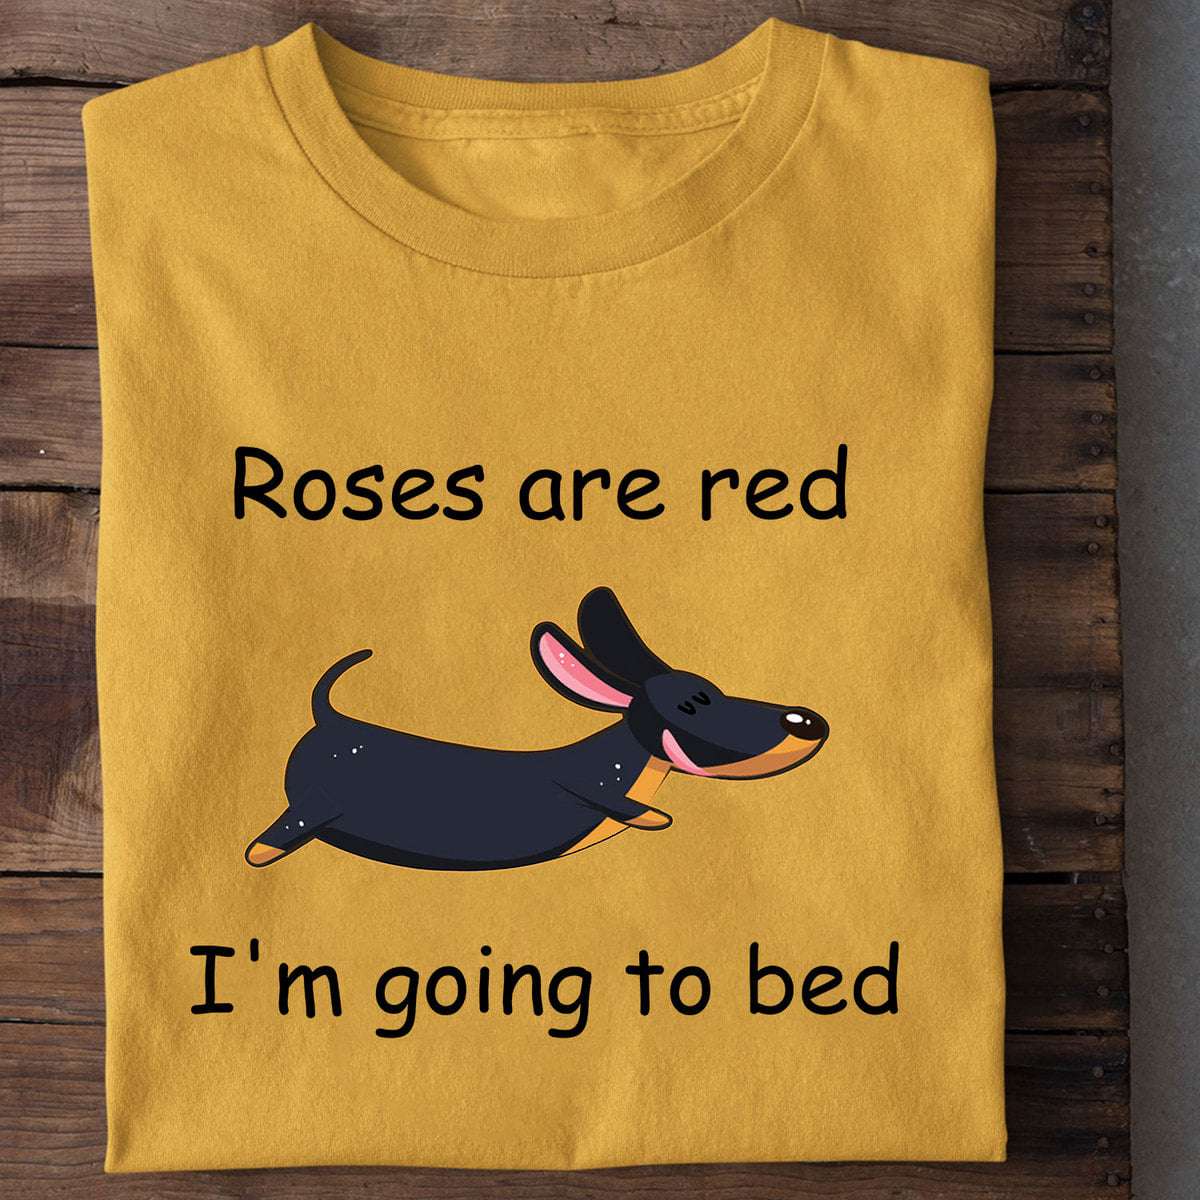 Roses are red I'm going to bed - Lazy sleepy Dachshund, Dachshund sausage dog